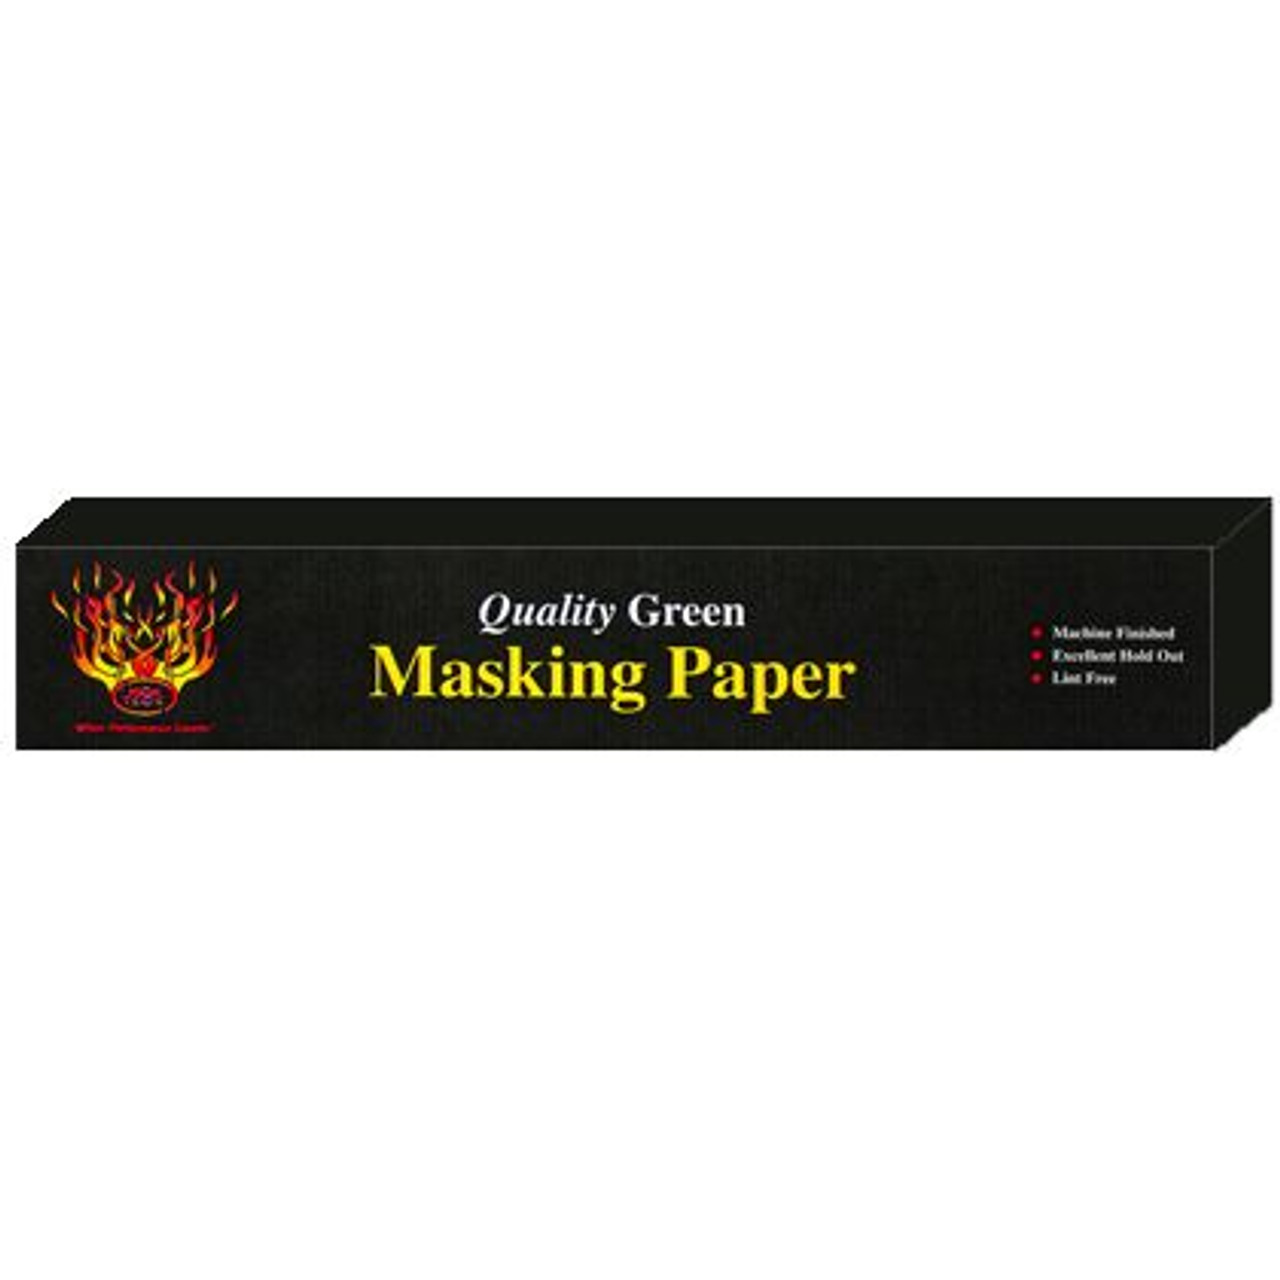 Quality Green Masking Paper, Weight: 35#, Size: 36" X 500'